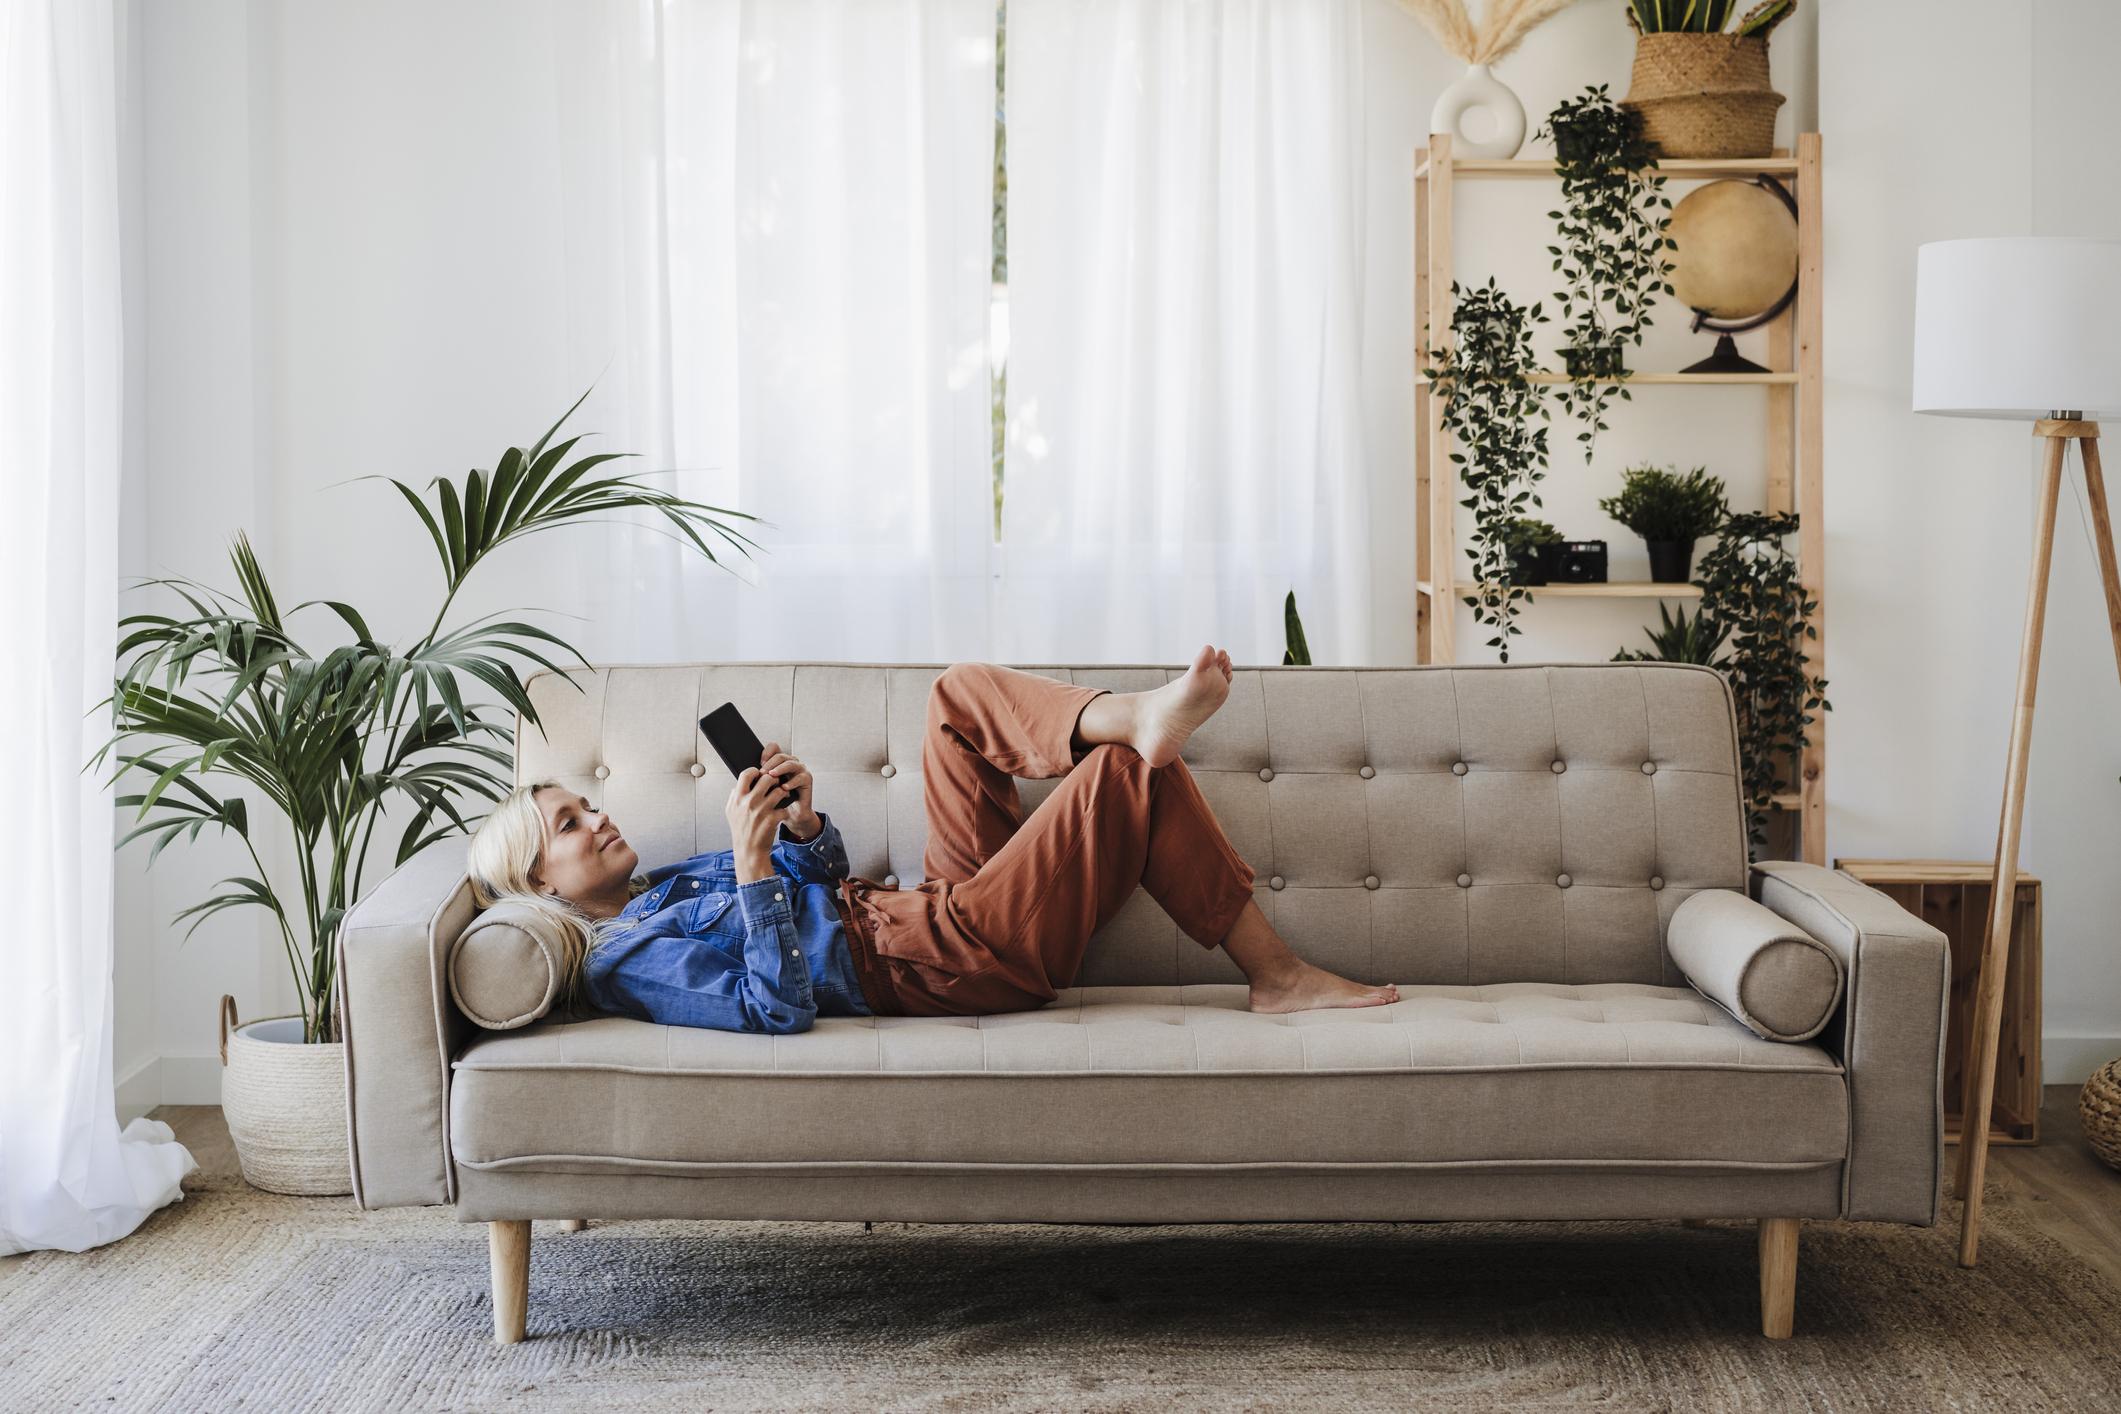  A woman using a phone while lying on a cream sofa surrounded by house plants and a side lamp. 